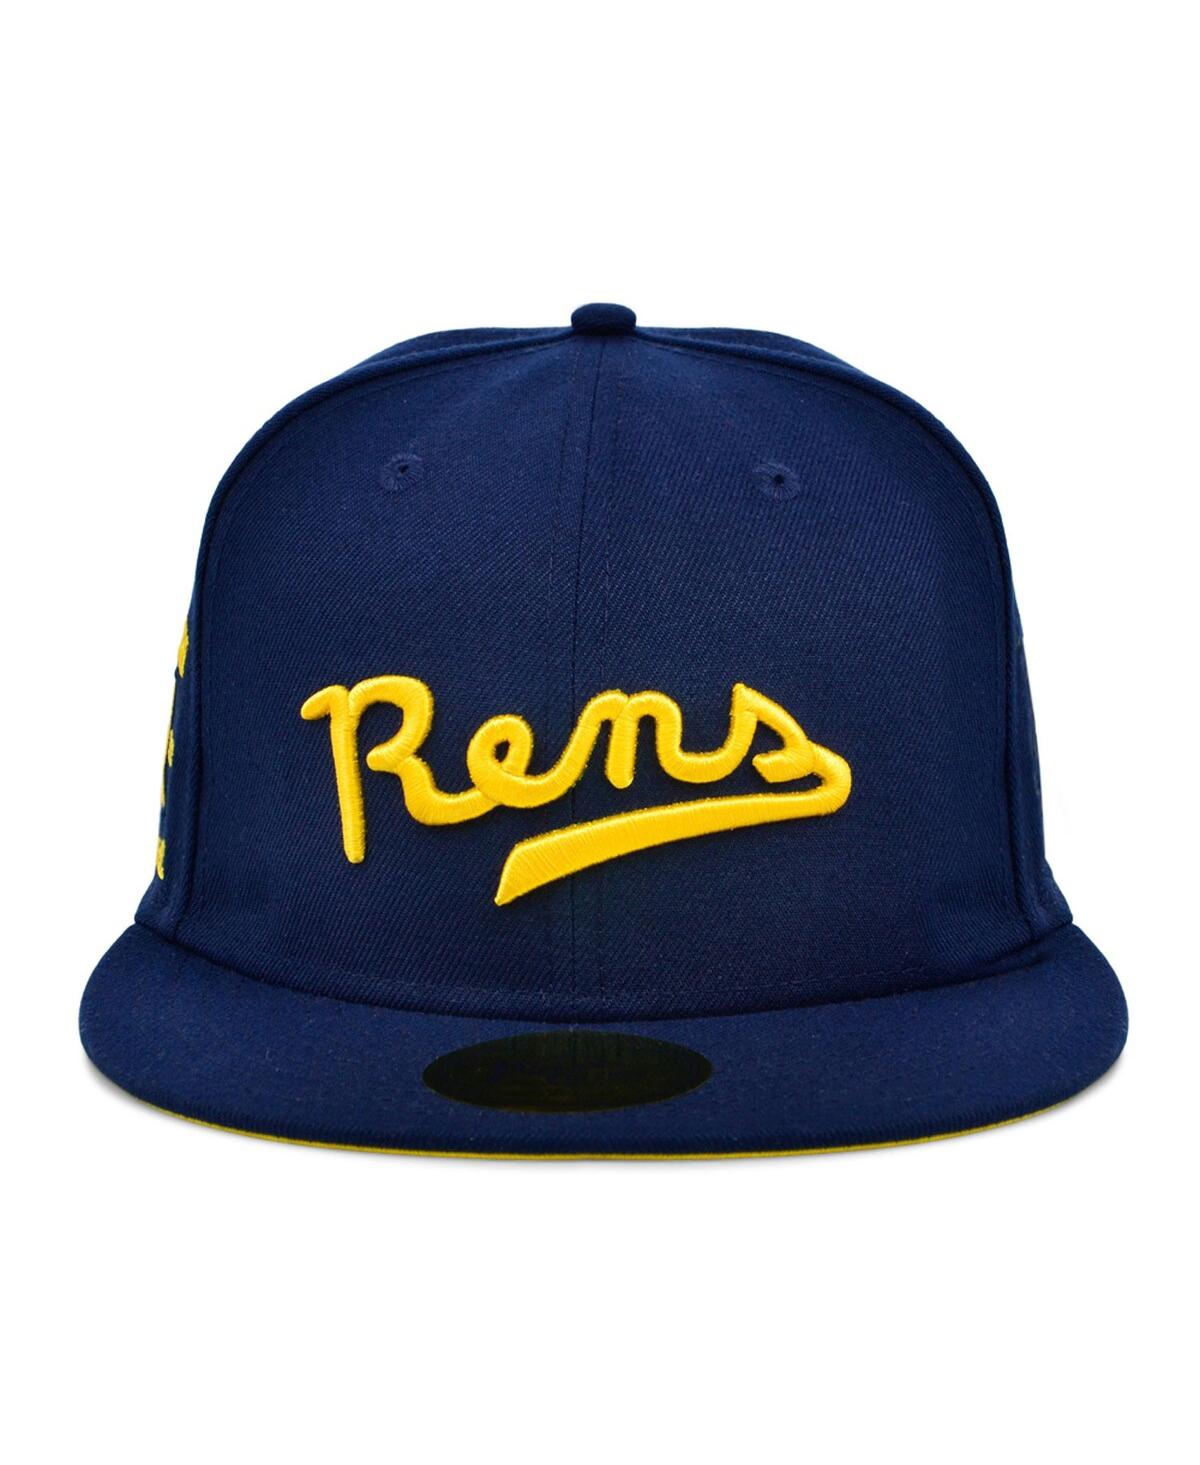 Shop Physical Culture Men's  Navy New York Rens Black Fives Fitted Hat